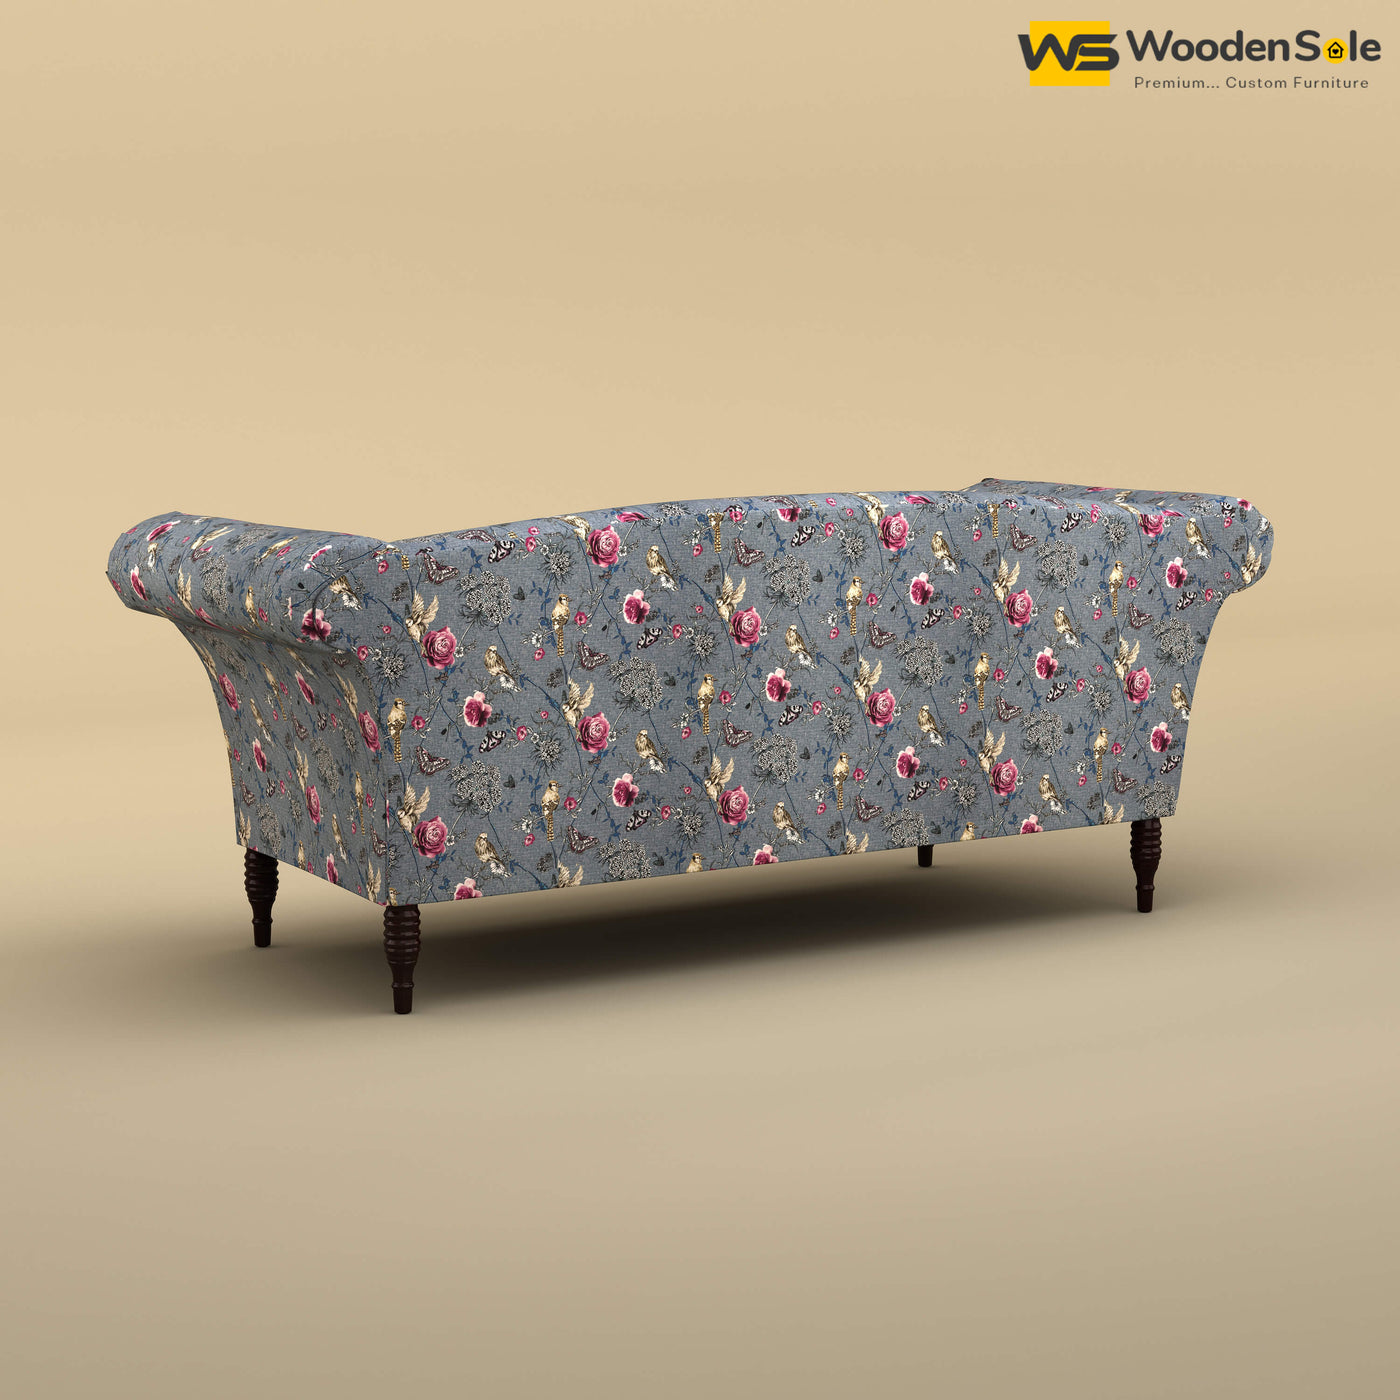 Leo Chaise Lounge (Cotton, Floral Printed)